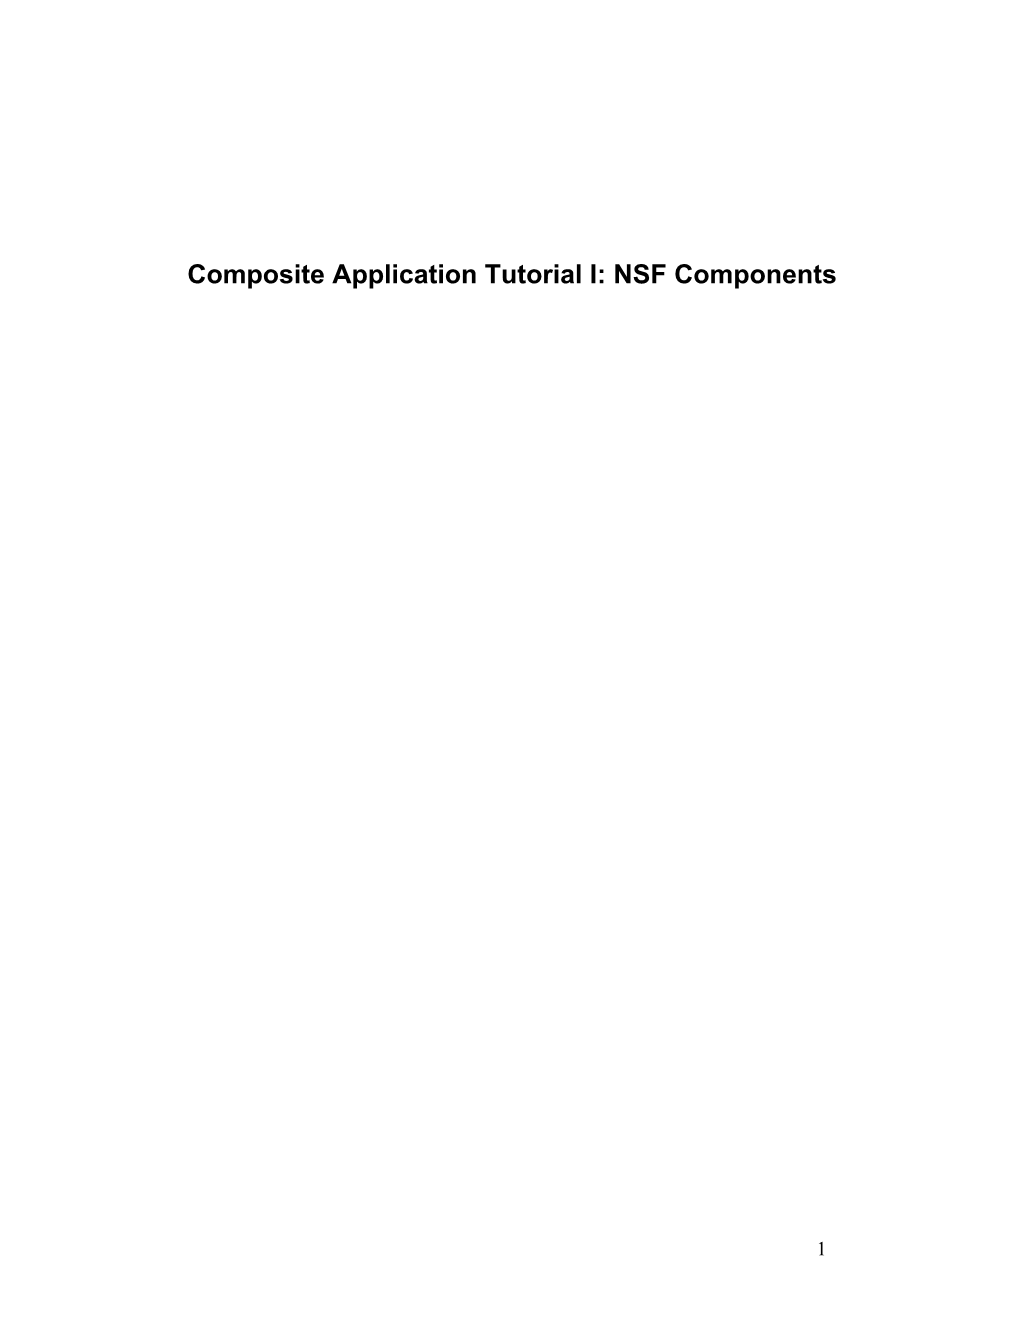 Composite Application Tutorial Overview